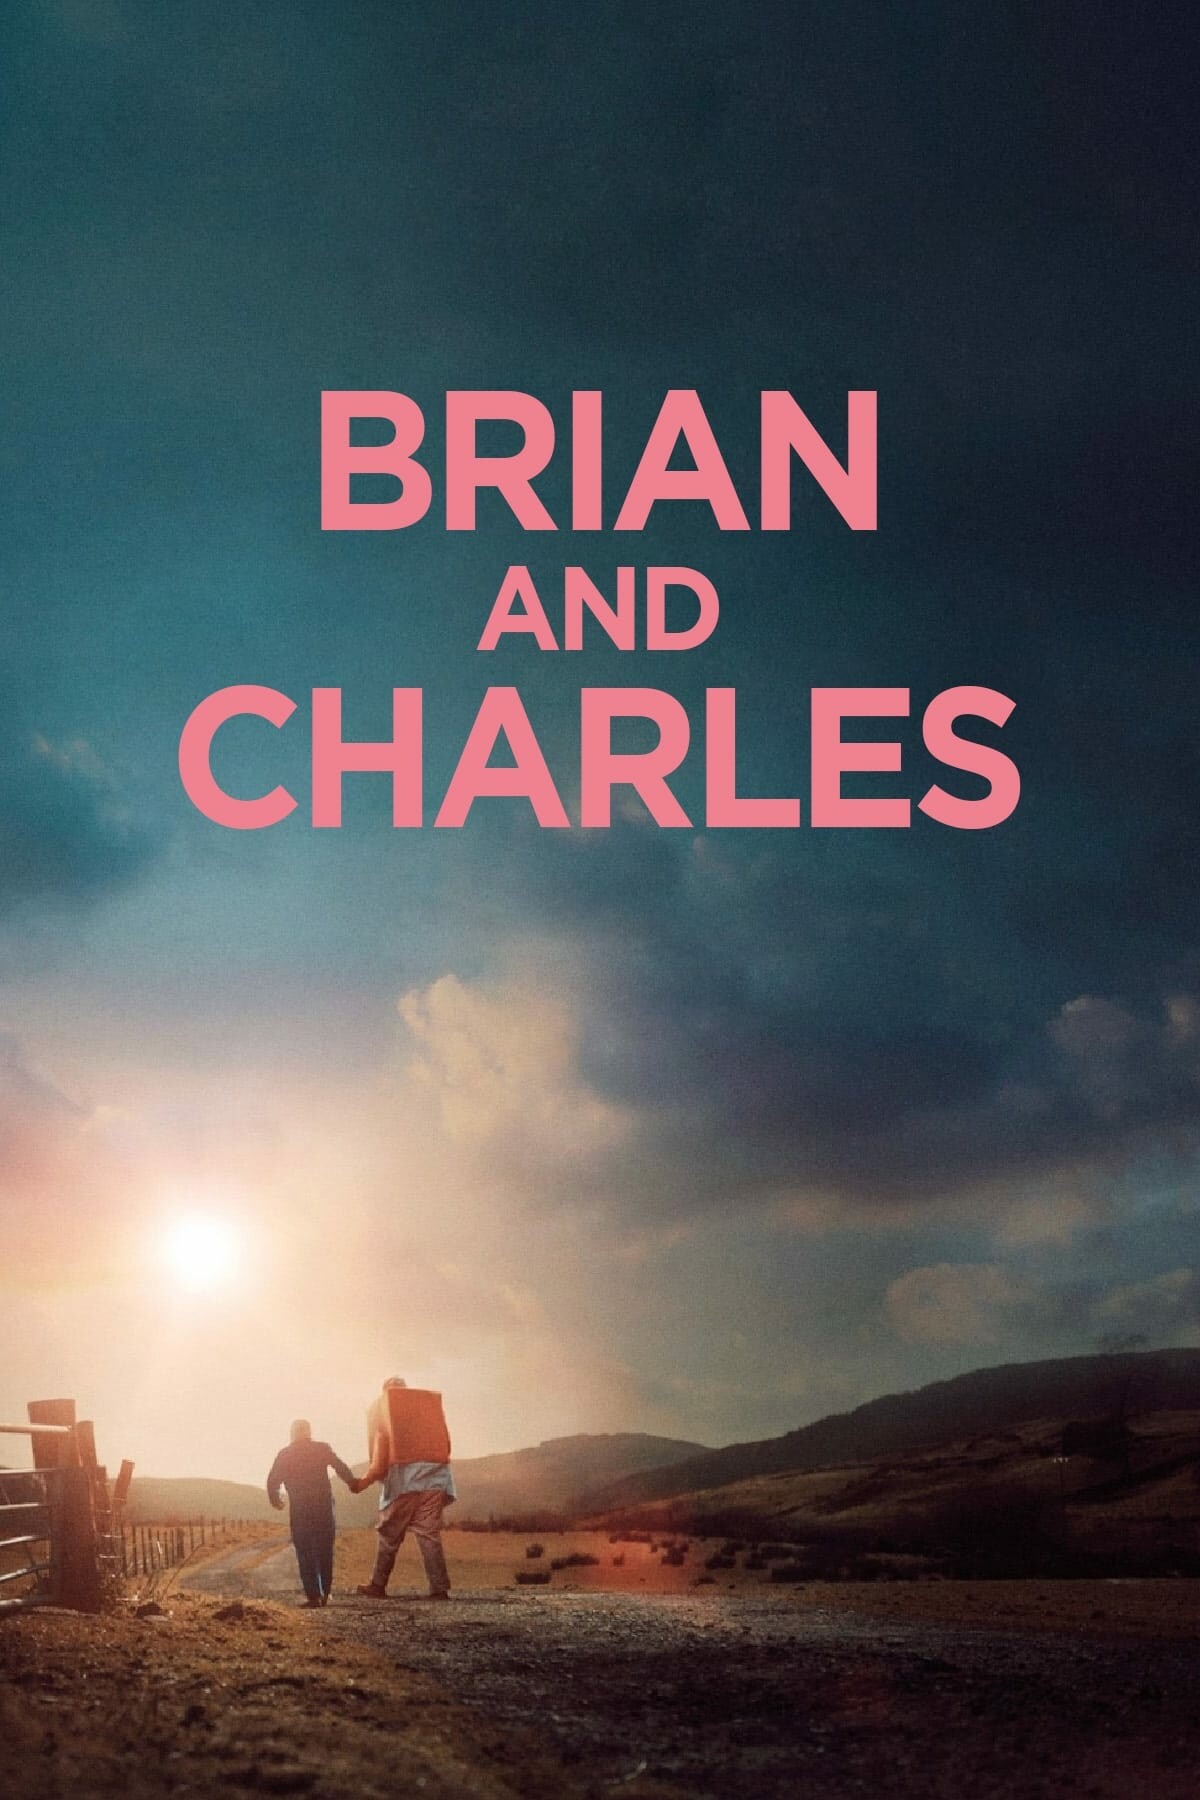 Brian and Charles 2022 2160p WEB-DL DDP5 1 HEVC-SMURF